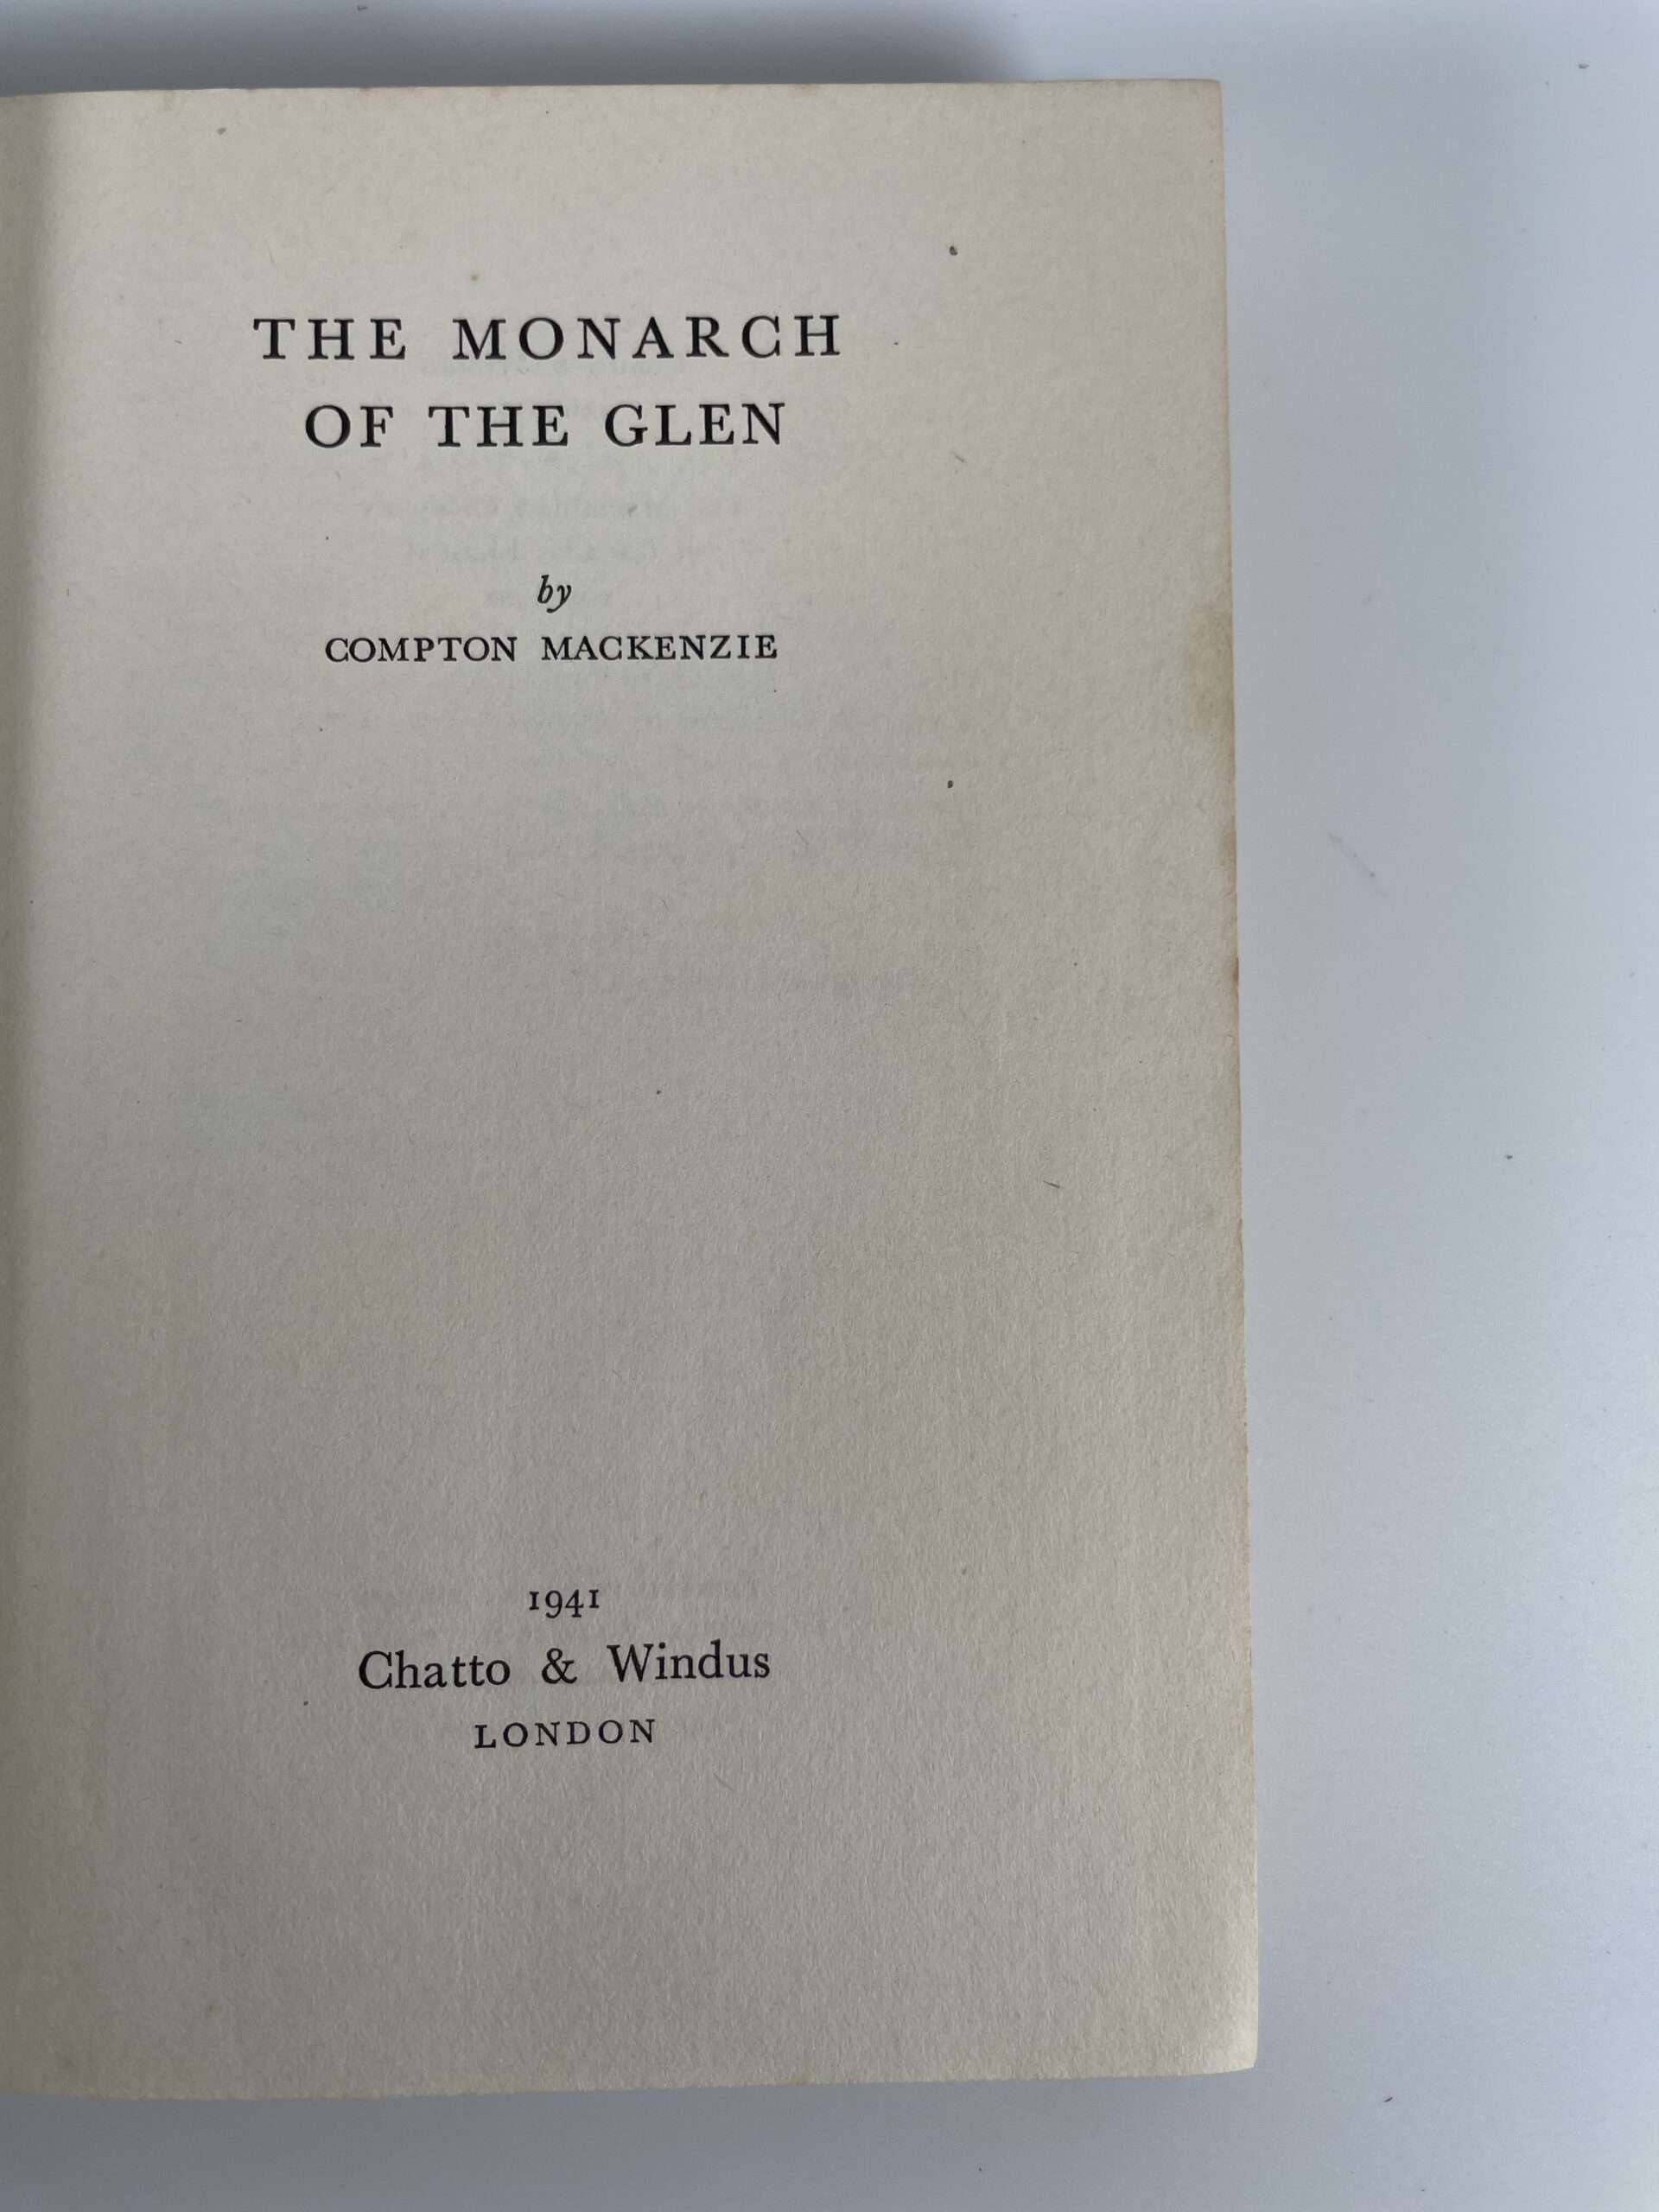 compton mackenzie the monarch of the glen first ed2